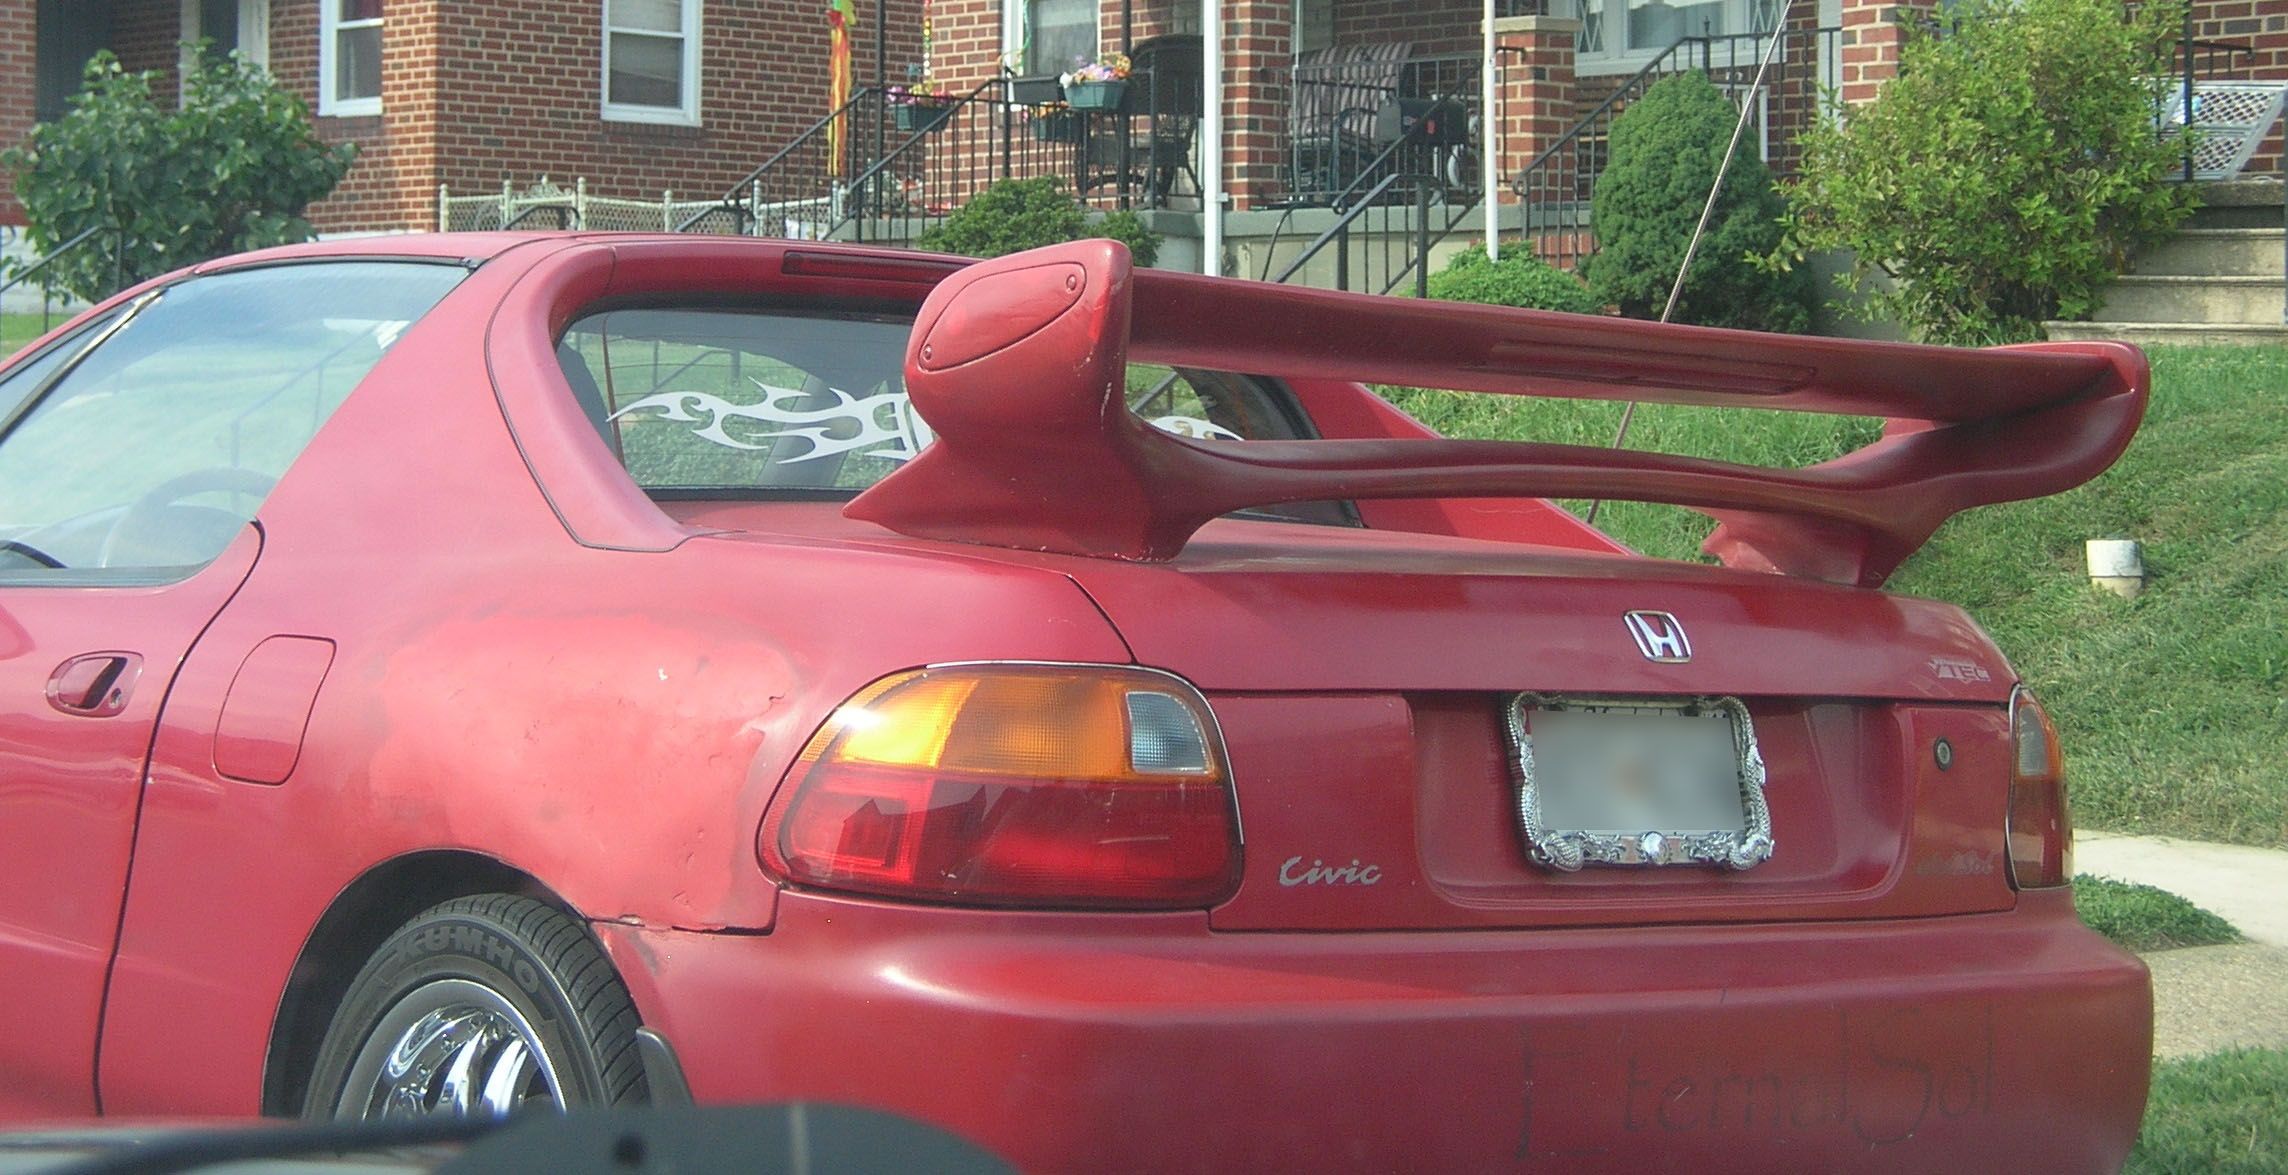 The extra downforce